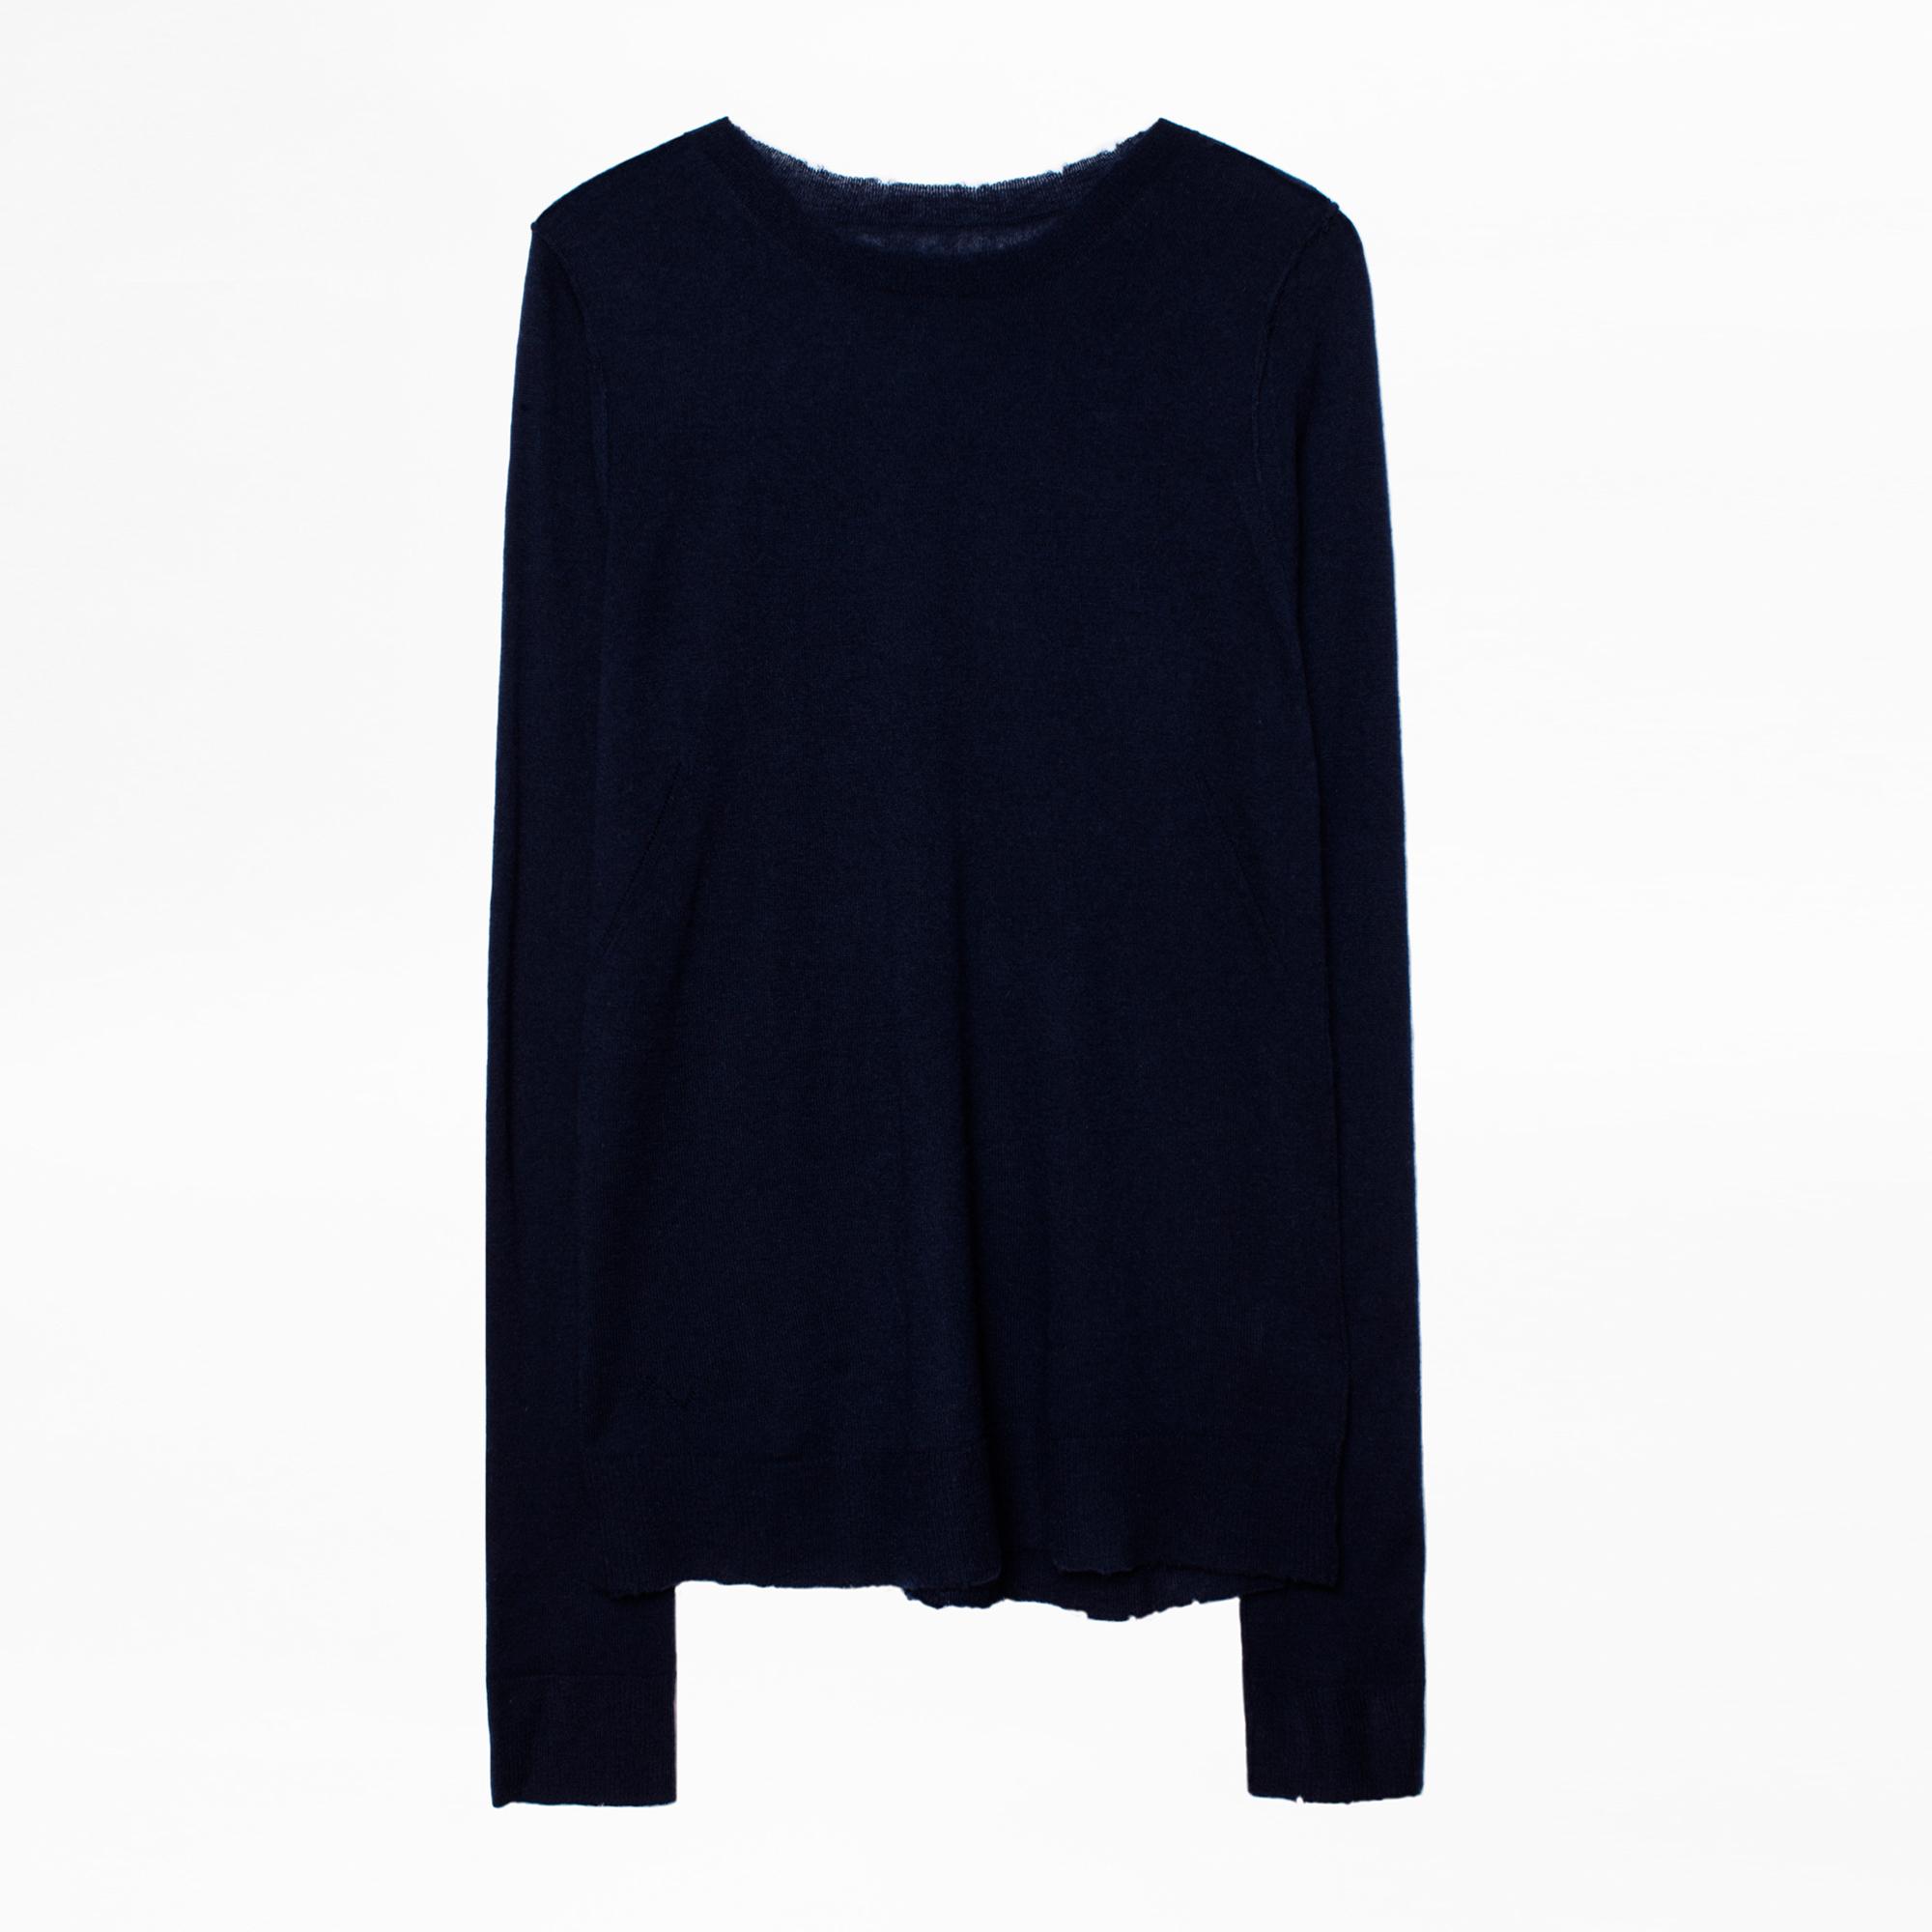 Zadig & Voltaire Miss Cp Cashmere Sweater in Blue - Lyst